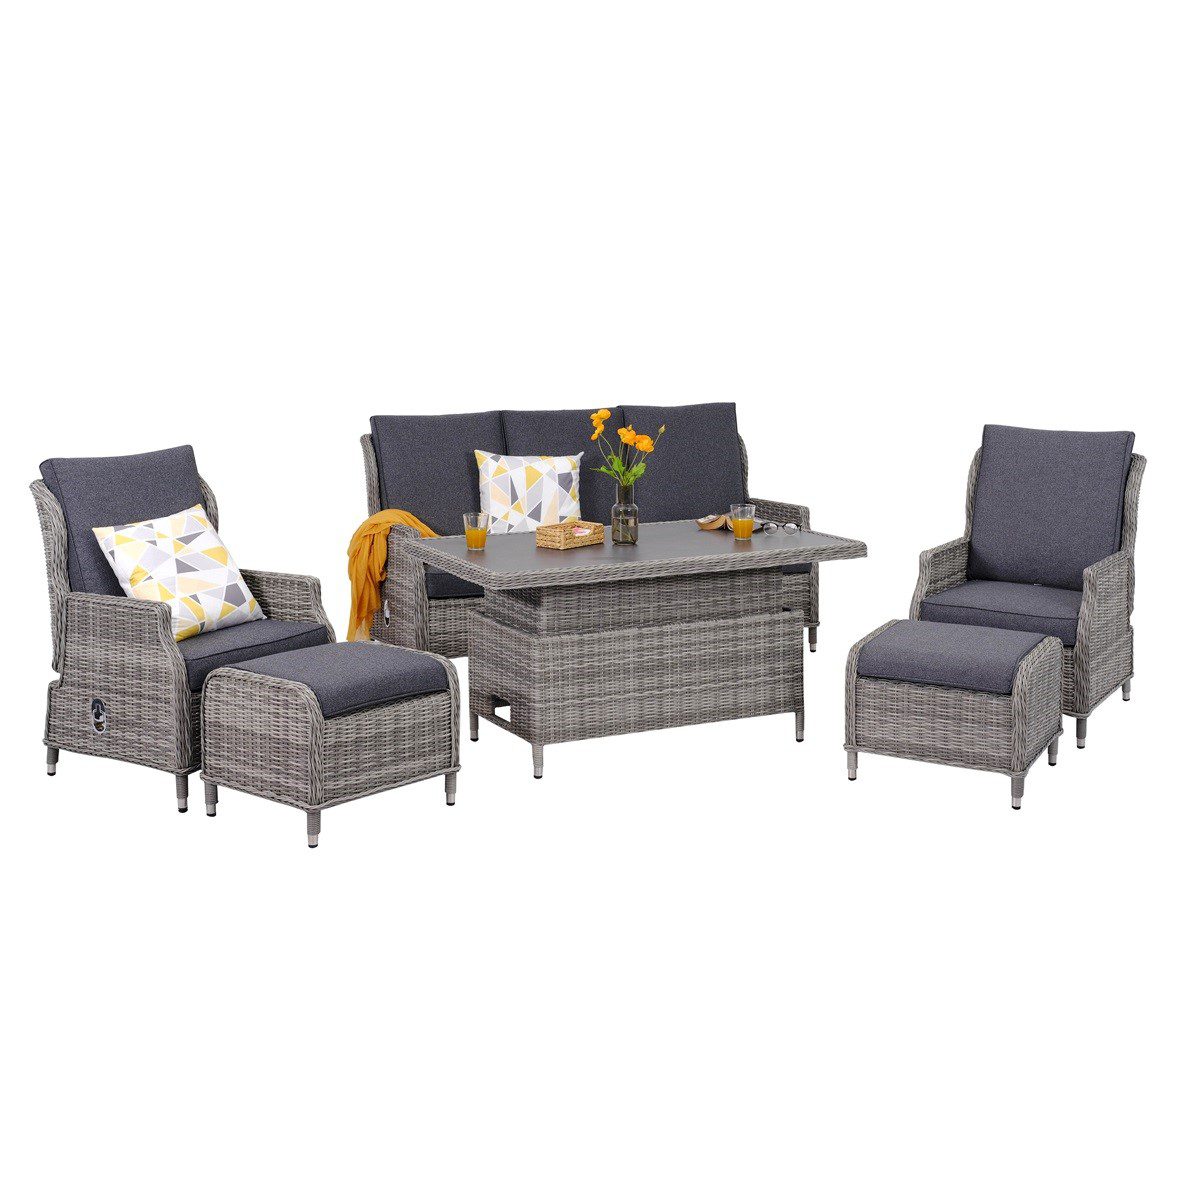 00460658073 Tenby Reclining Lounge Dining Set 2 Stoo (4)